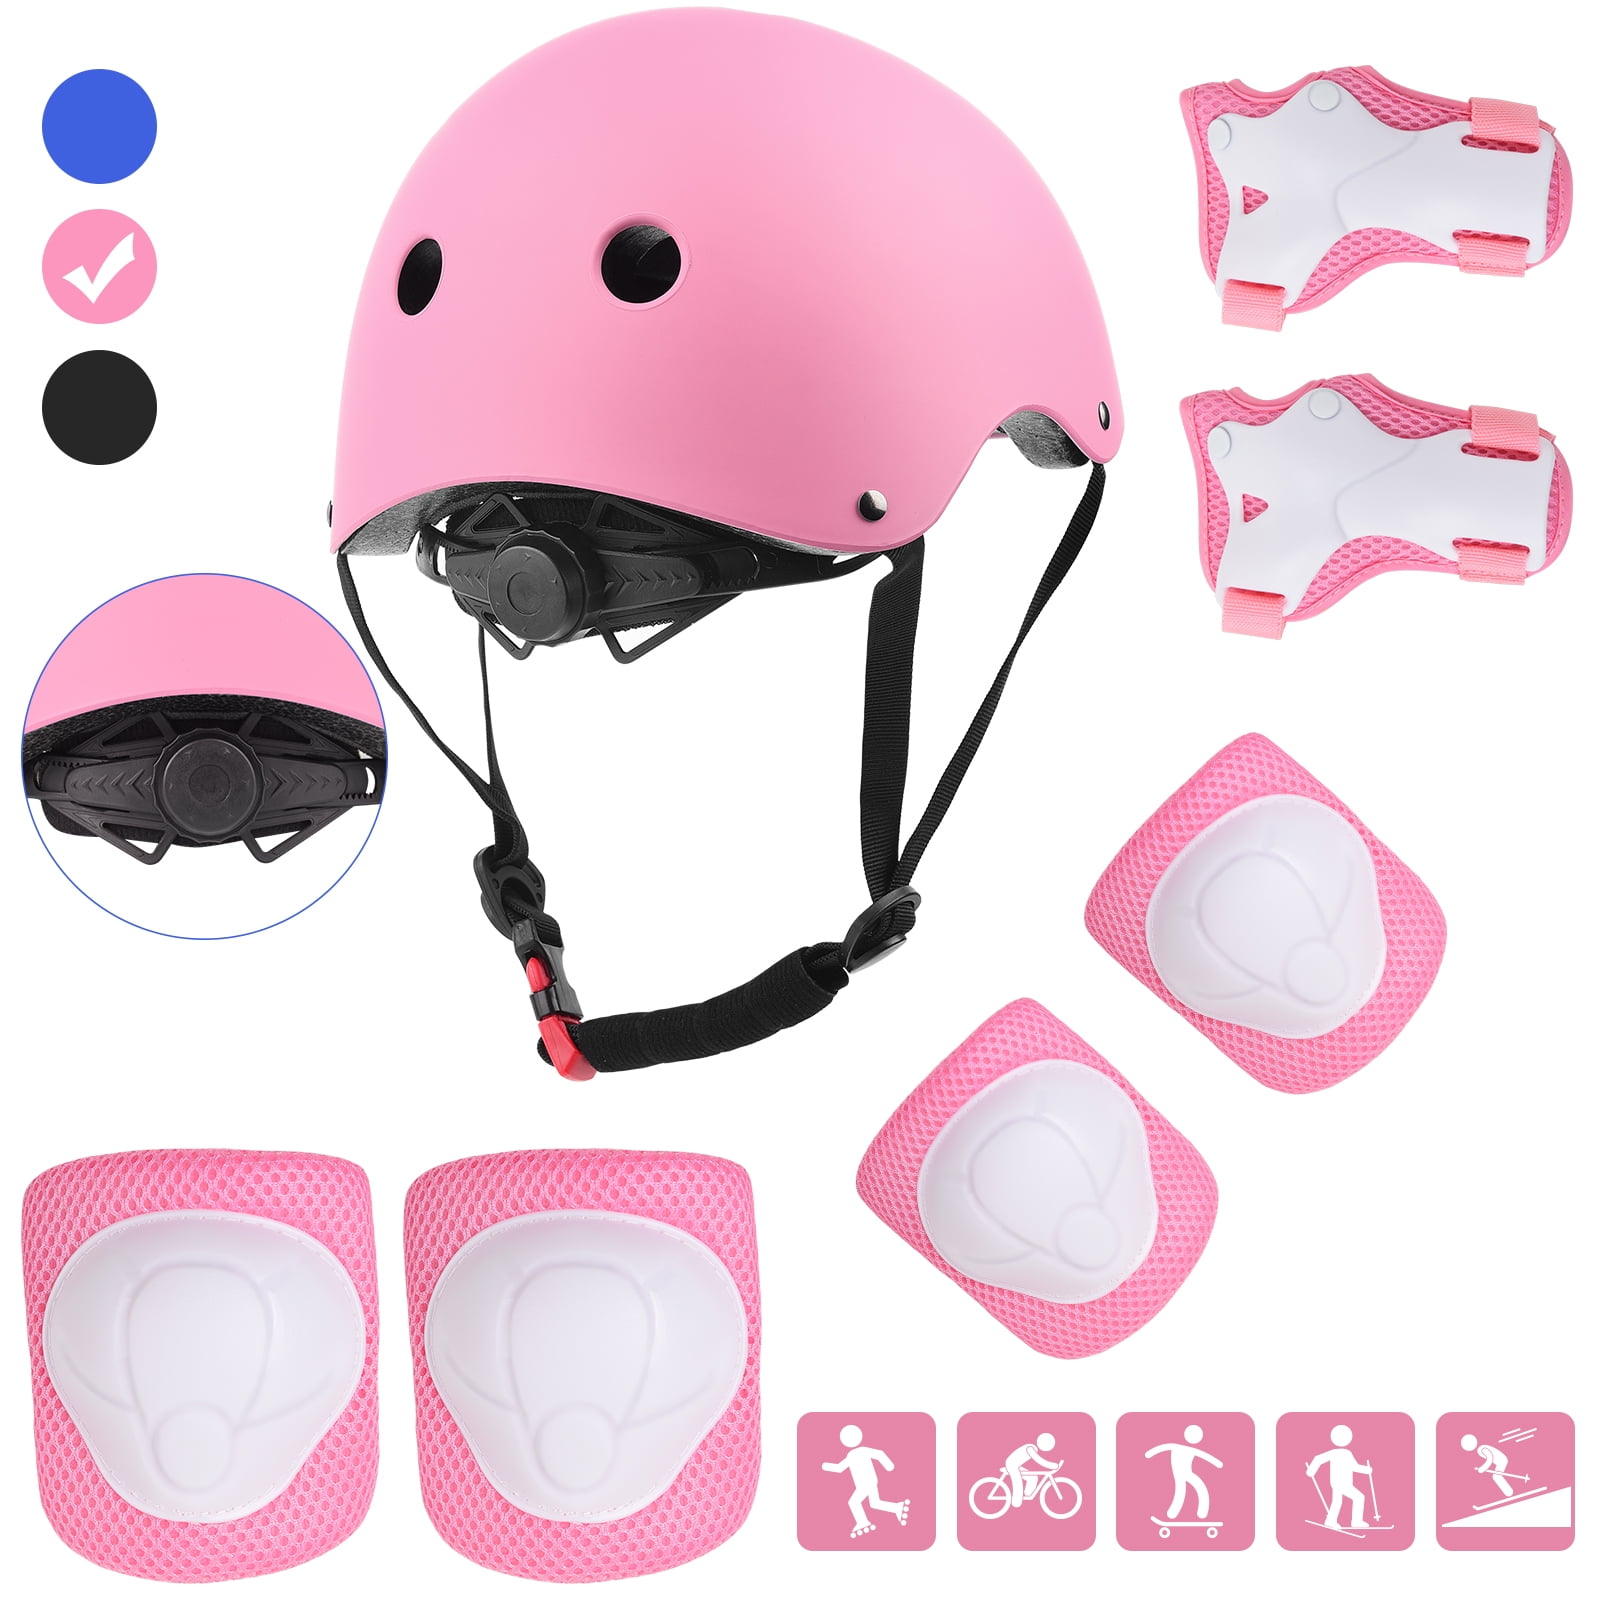 Dengofng Kids Bike Helmet and Pads Set Adjustable Kids Bike Helmet Knee Pads Elbow Pads Wrist Pads Use for Scooter Cycling Roller Skating